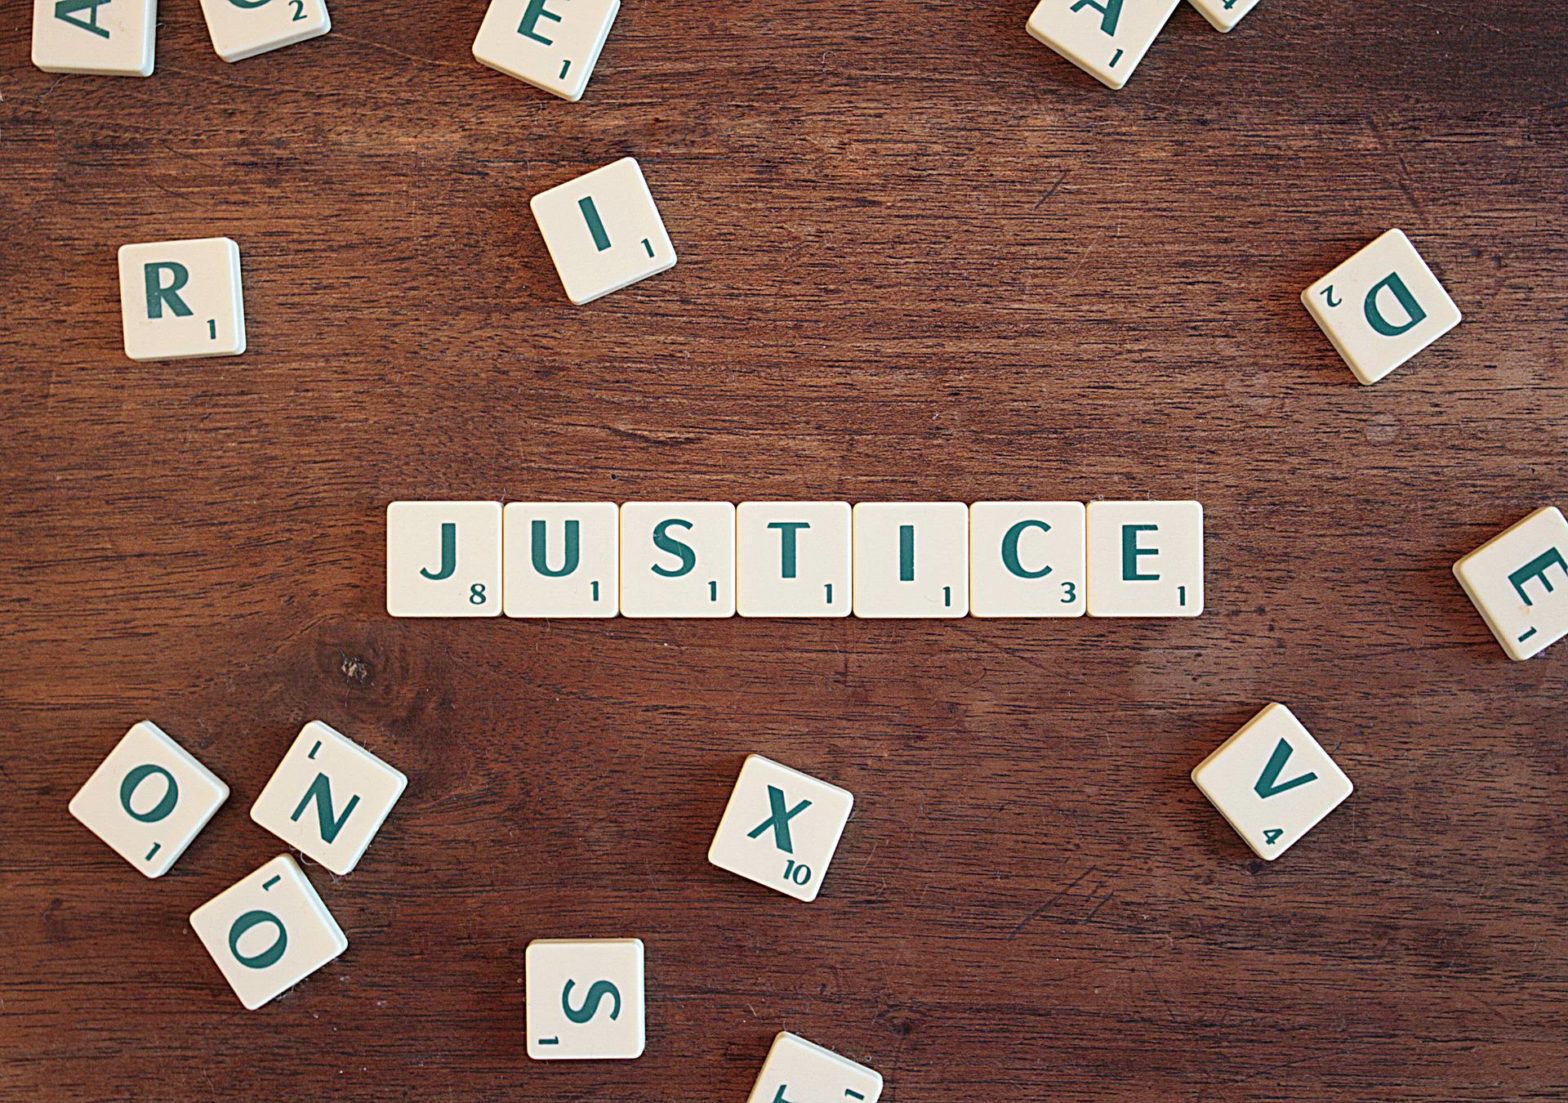 image of justice written in scrabble pieces